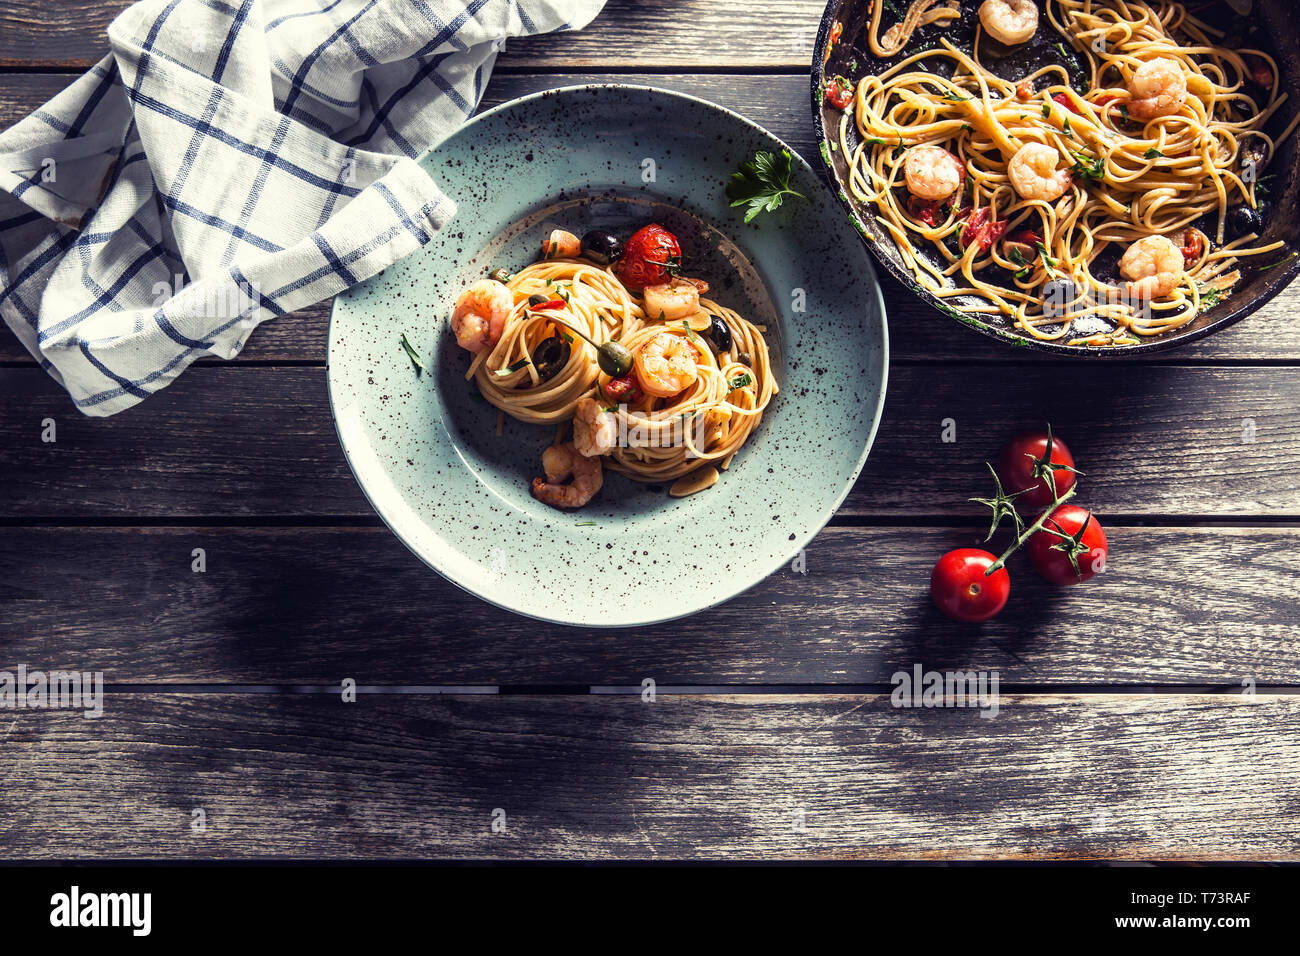 Pasta spaghetti on plate and pan with shrimp tomato sauce toatoes and herbs. Italian or mediterranean cuisine. Stock Photo